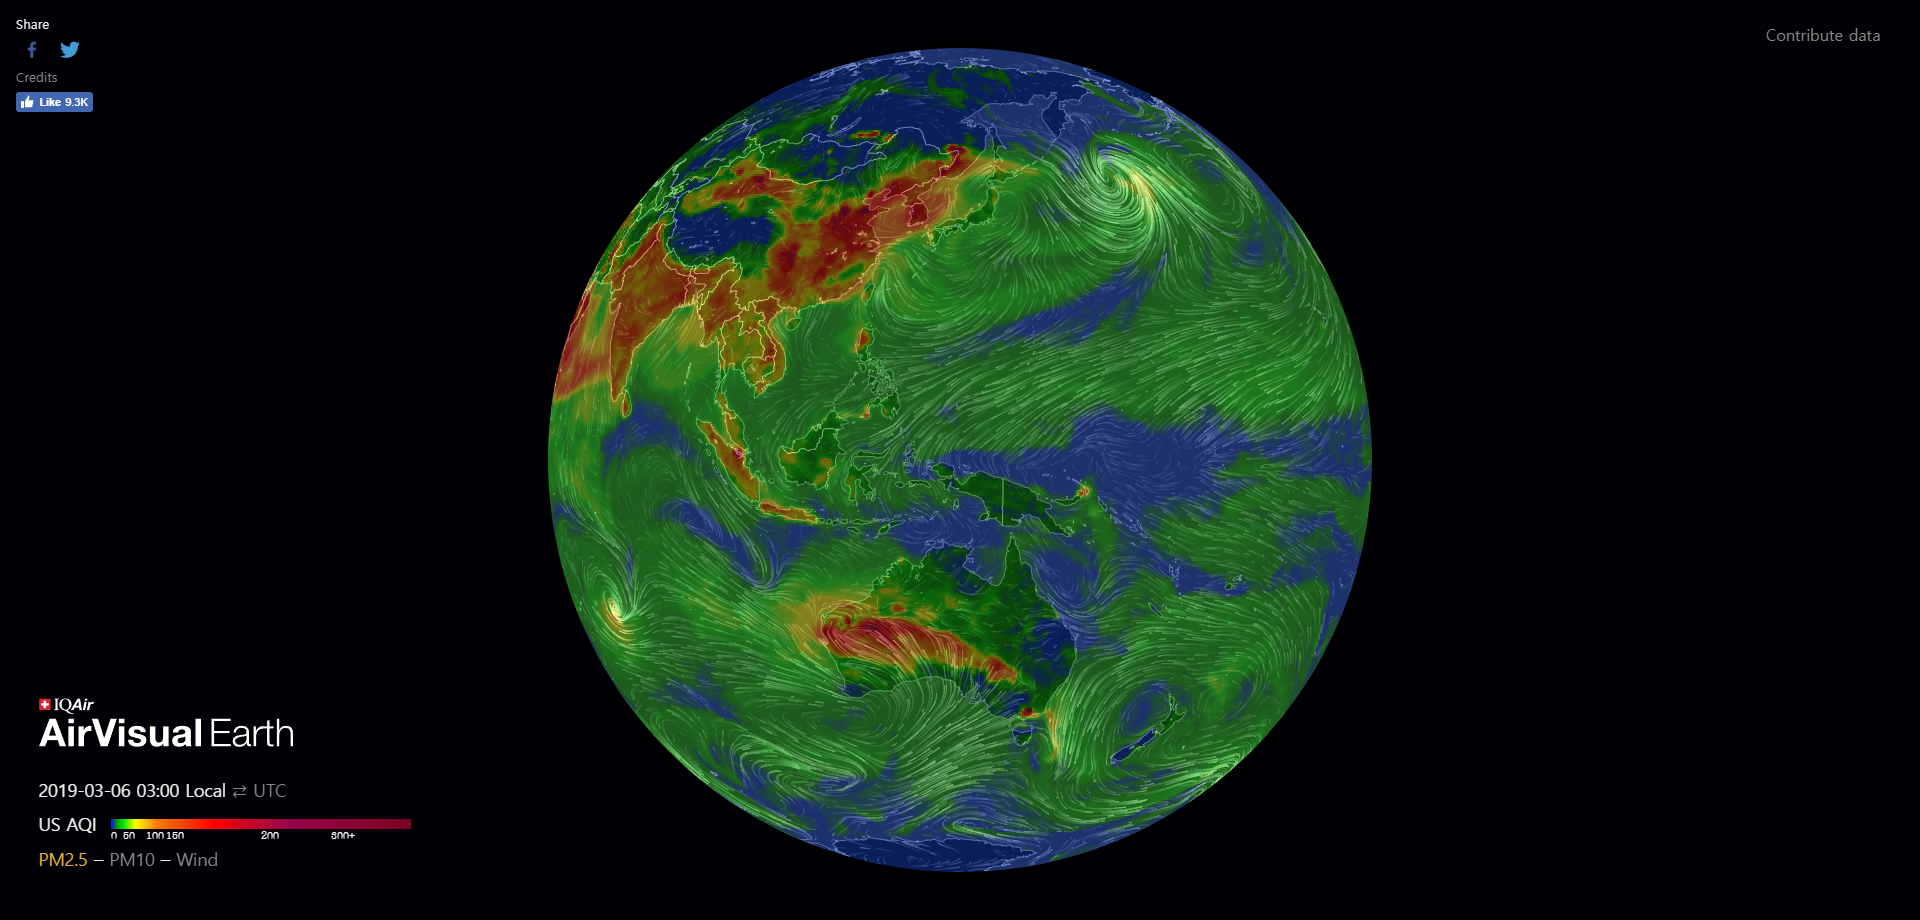 screencapture-airvisual-earth-2019-03-06-03_19_14.png